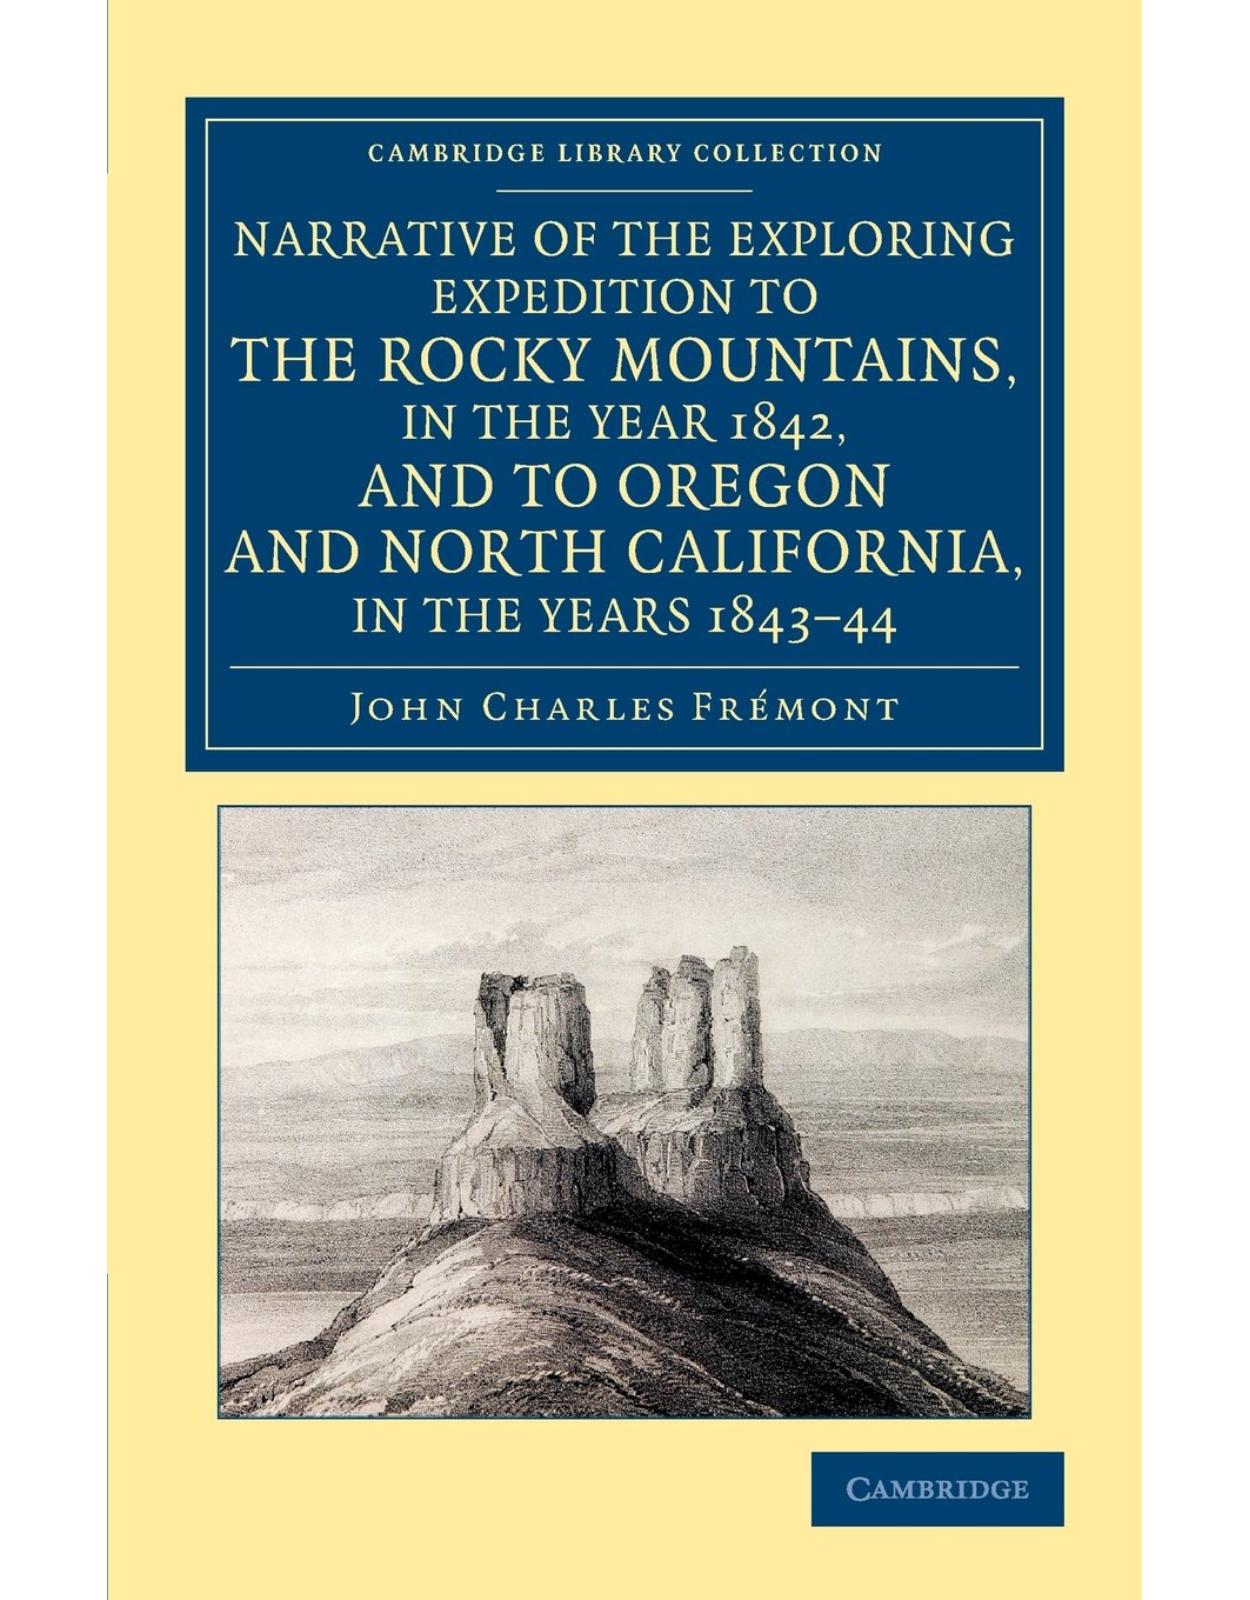 Narrative of the Exploring Expedition to the Rocky Mountains, in the Year 1842, and to Oregon and North California, in the Years 1843-44 (Cambridge Library Collection - North American History)